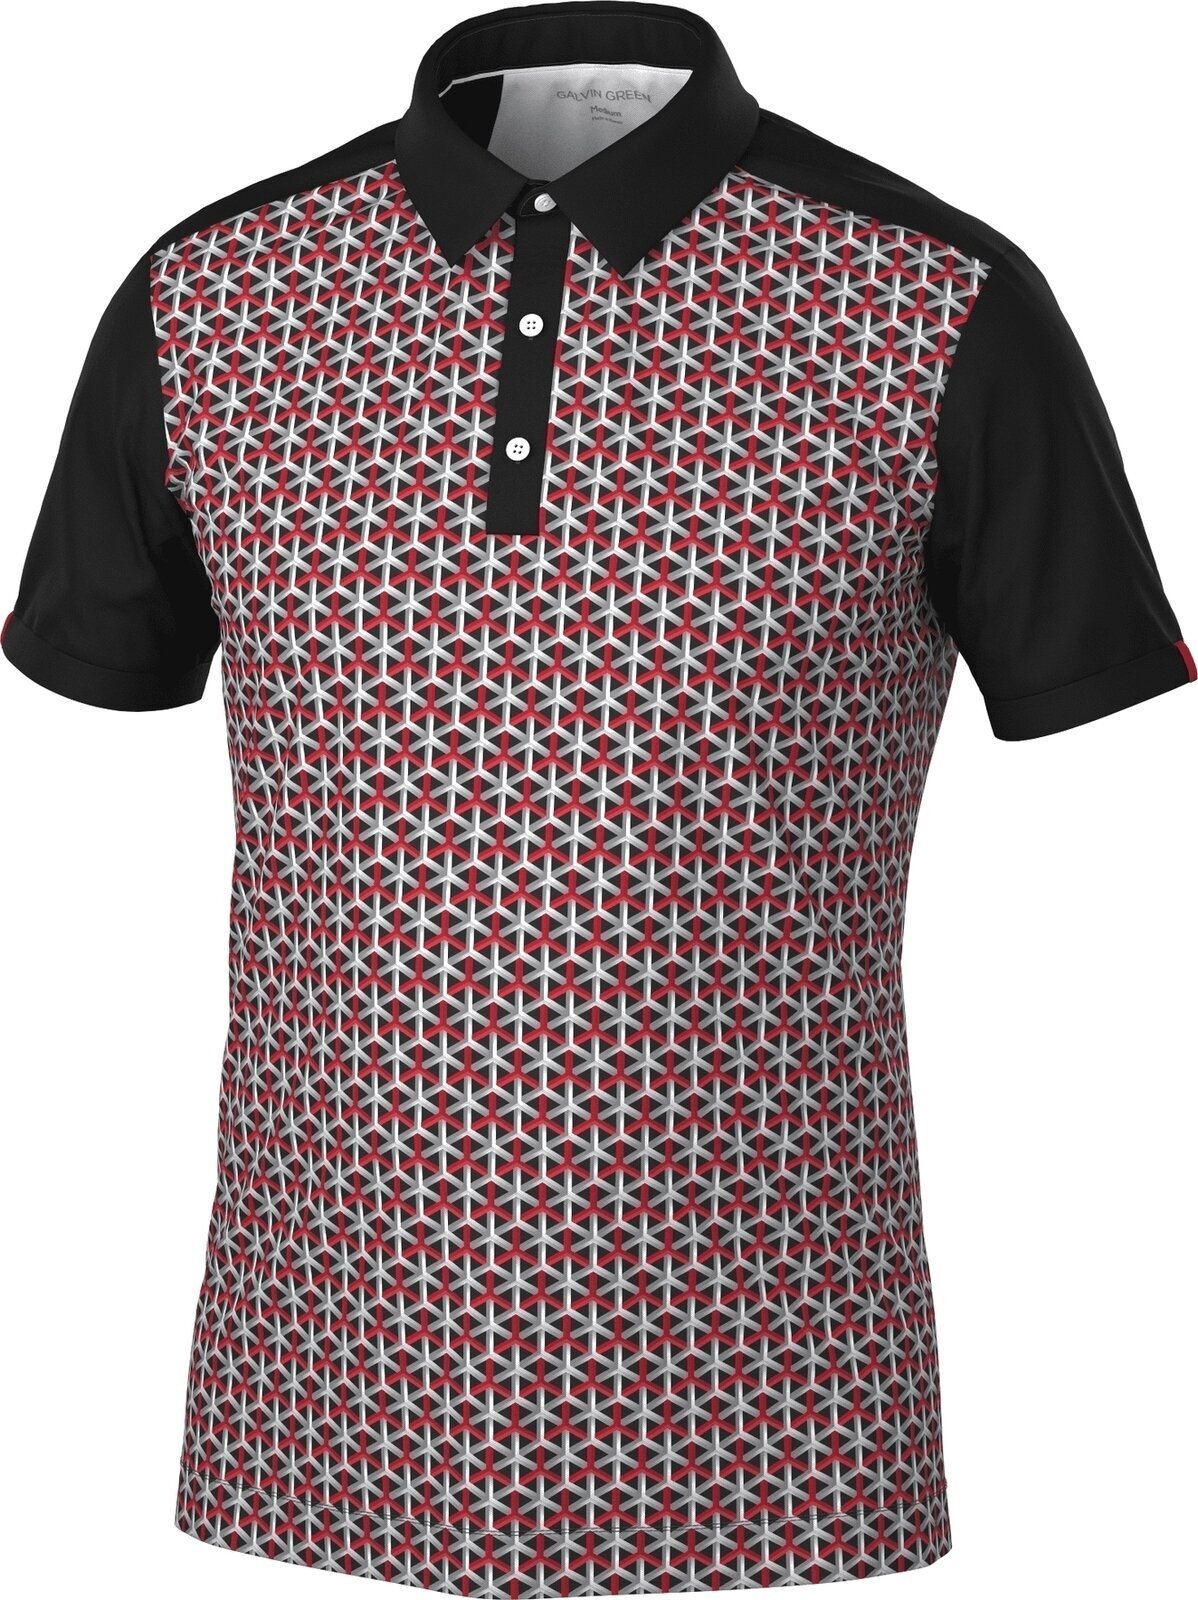 Polo Galvin Green Mio Mens Breathable Short Sleeve Shirt Red/Black M